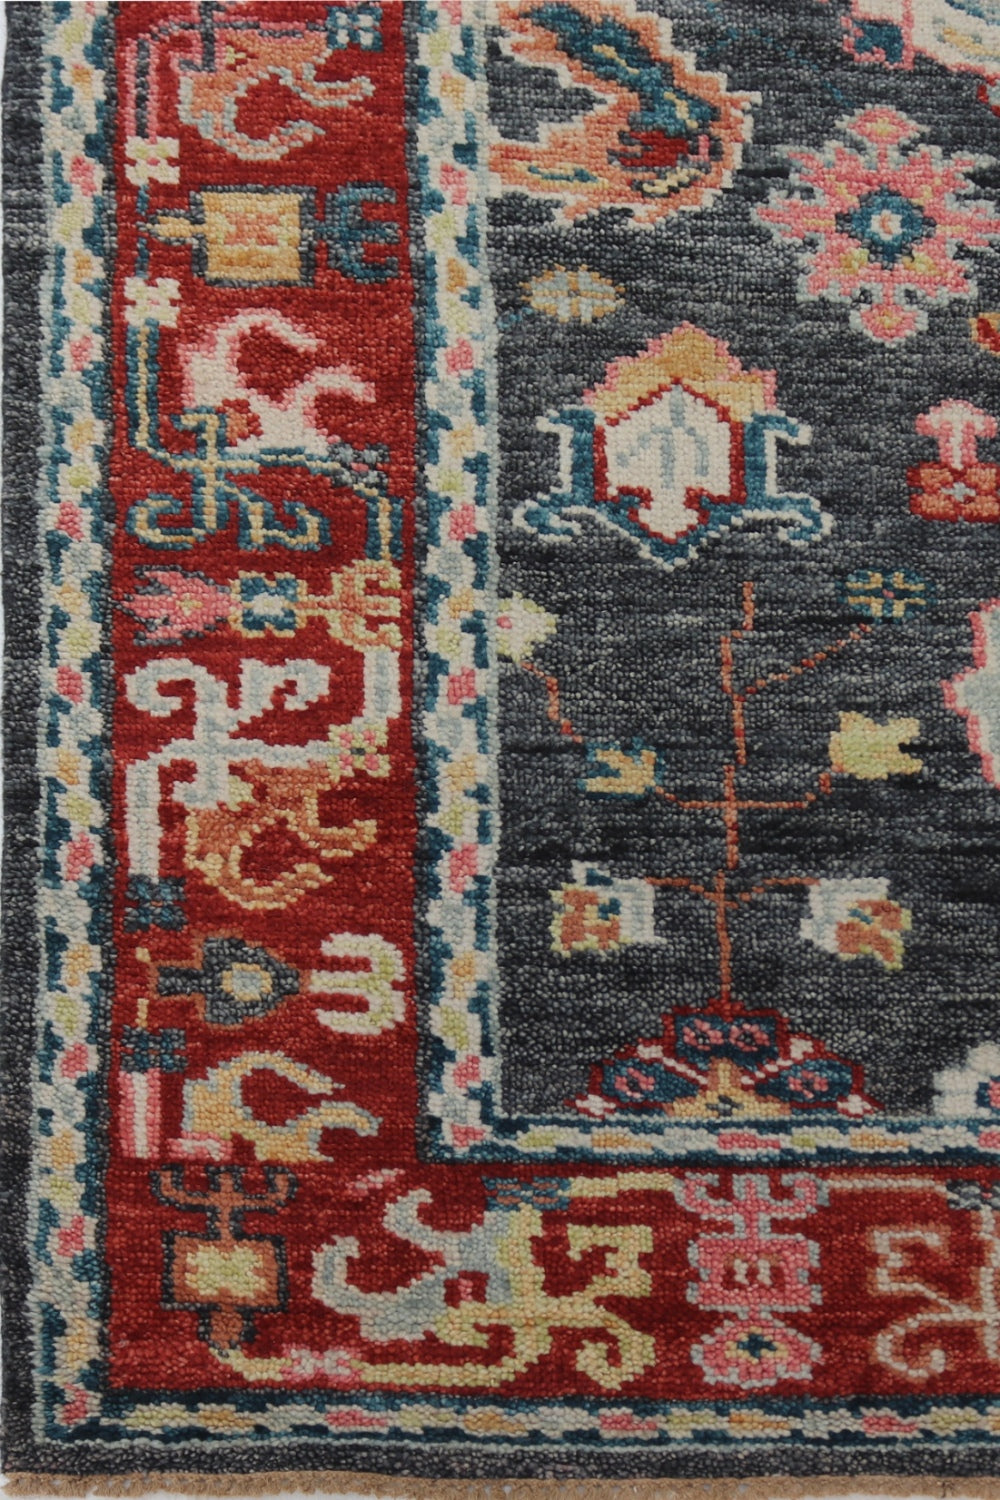 Sultanabad 4 Handwoven Traditional Rug, J71736